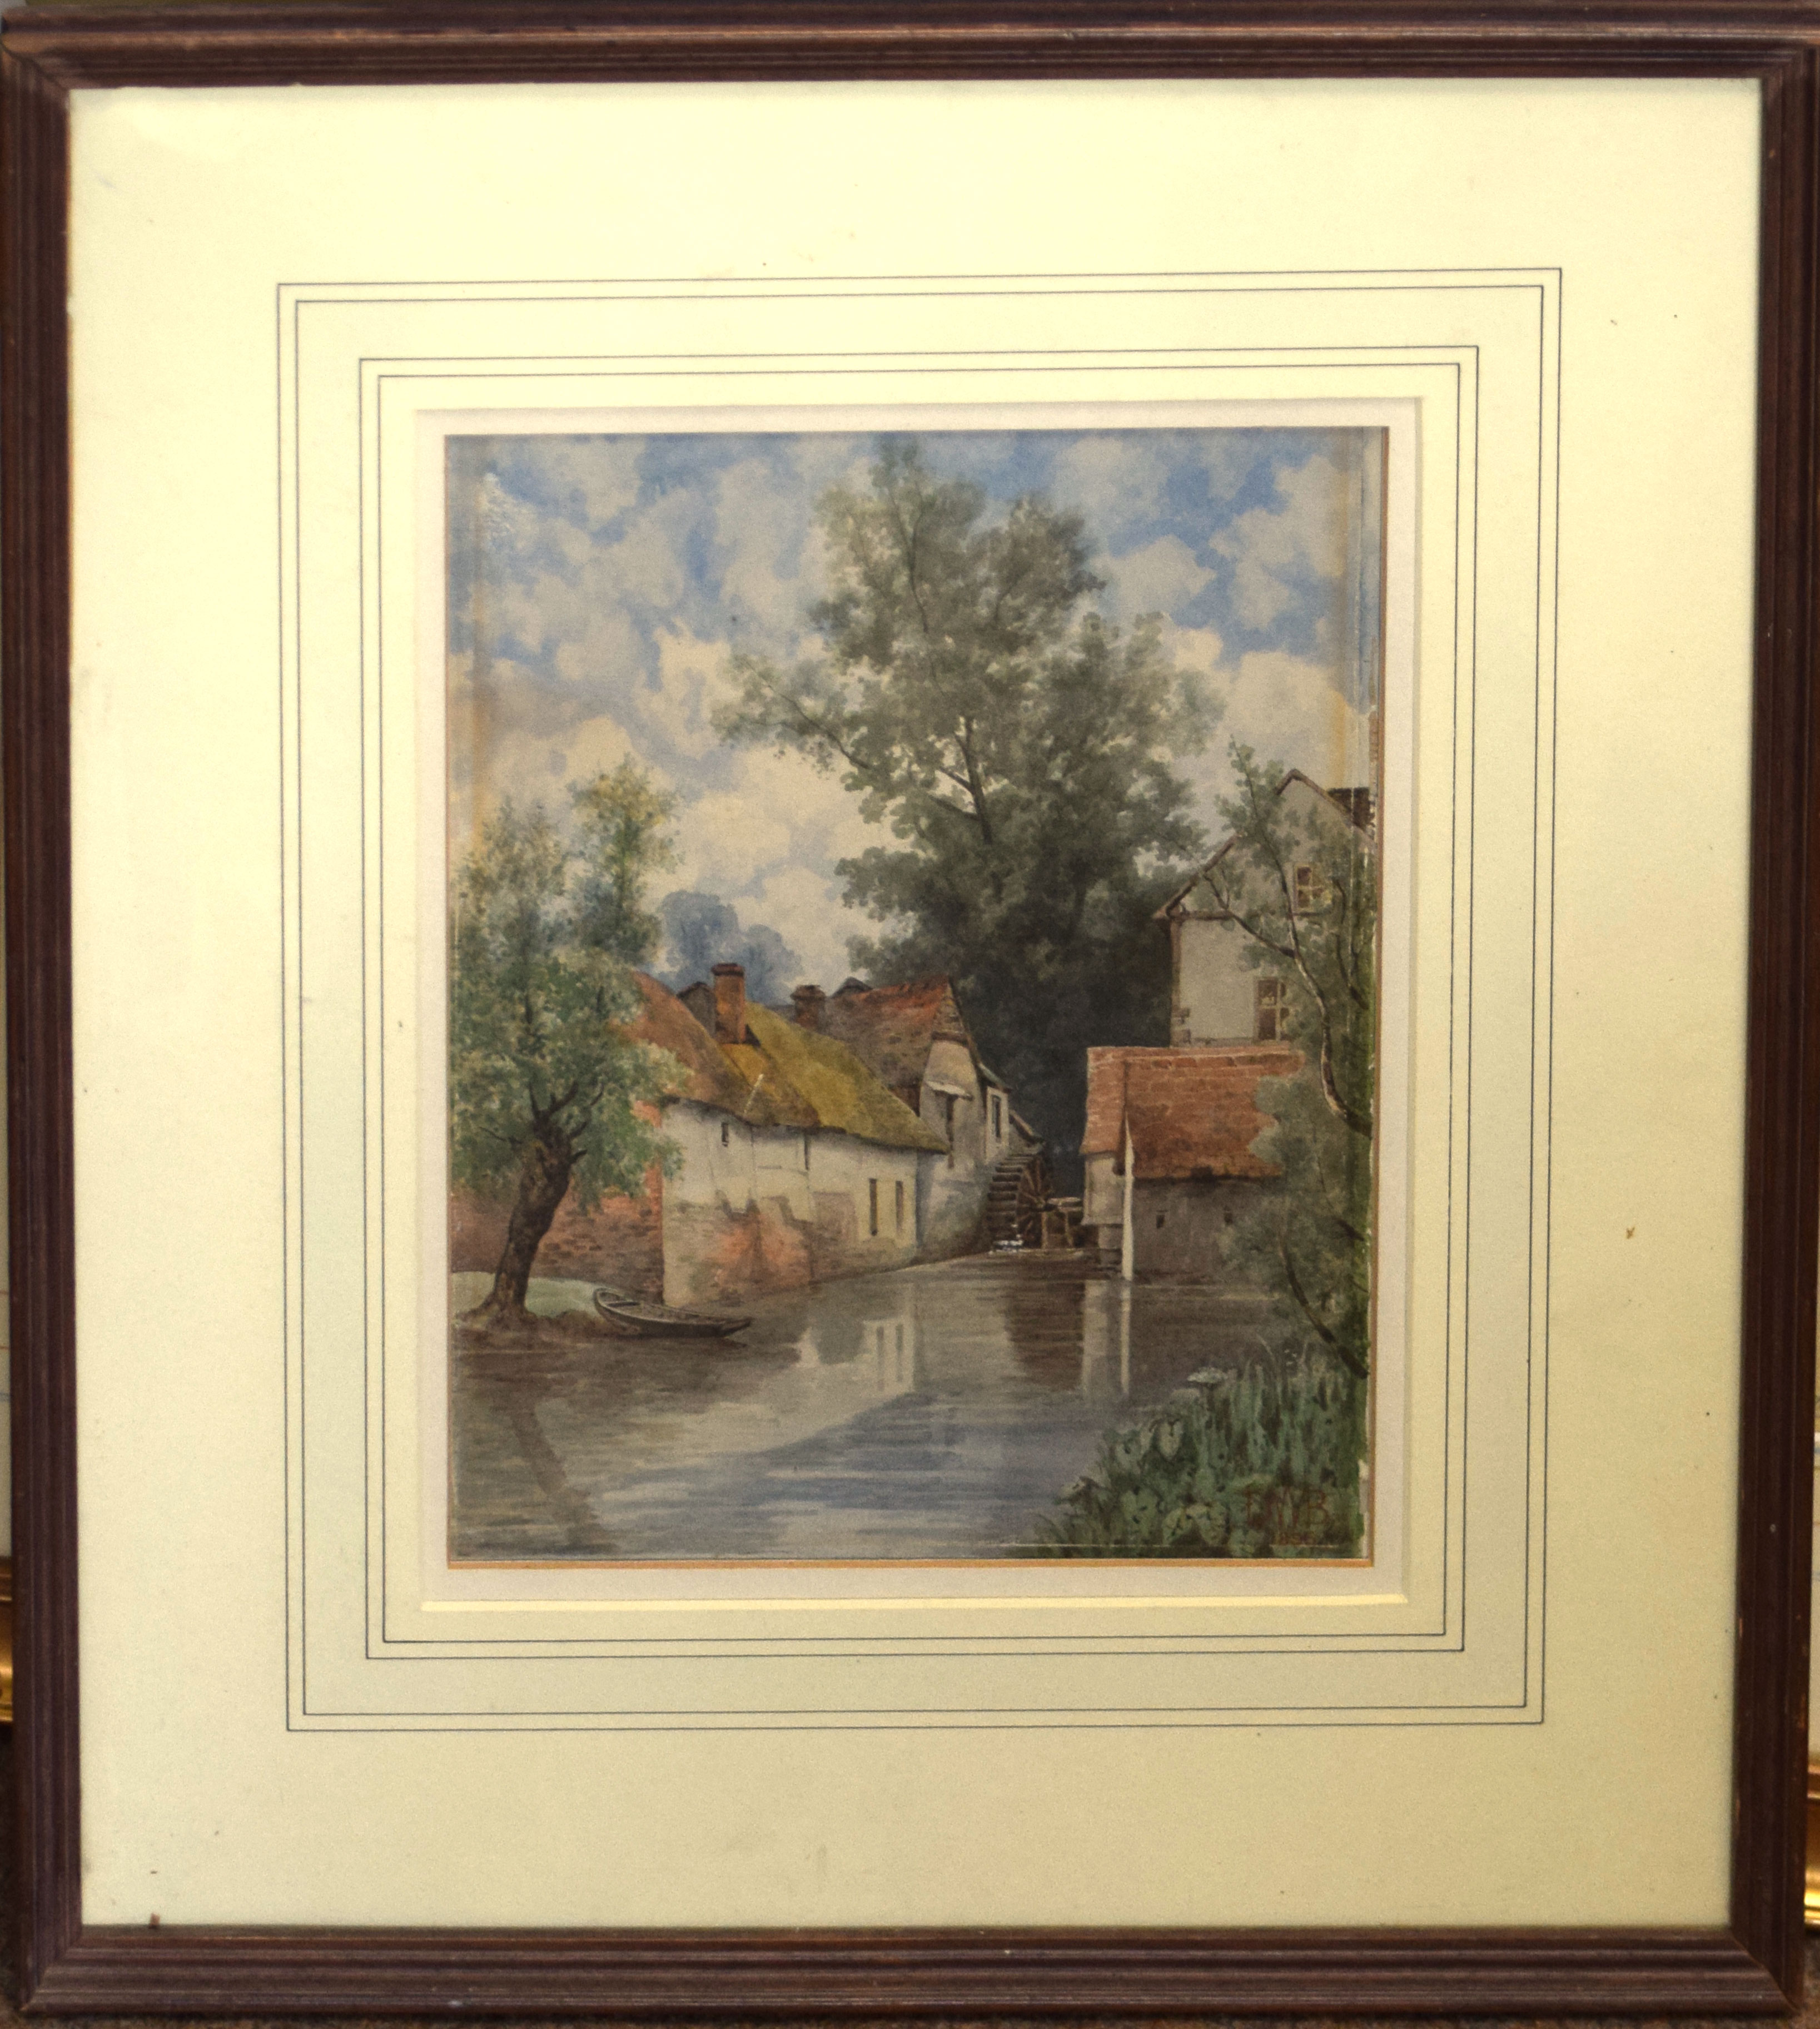 David Walter Batley, Watermill scene, watercolour, signed and dated 1896 lower right, 28 x 21cm